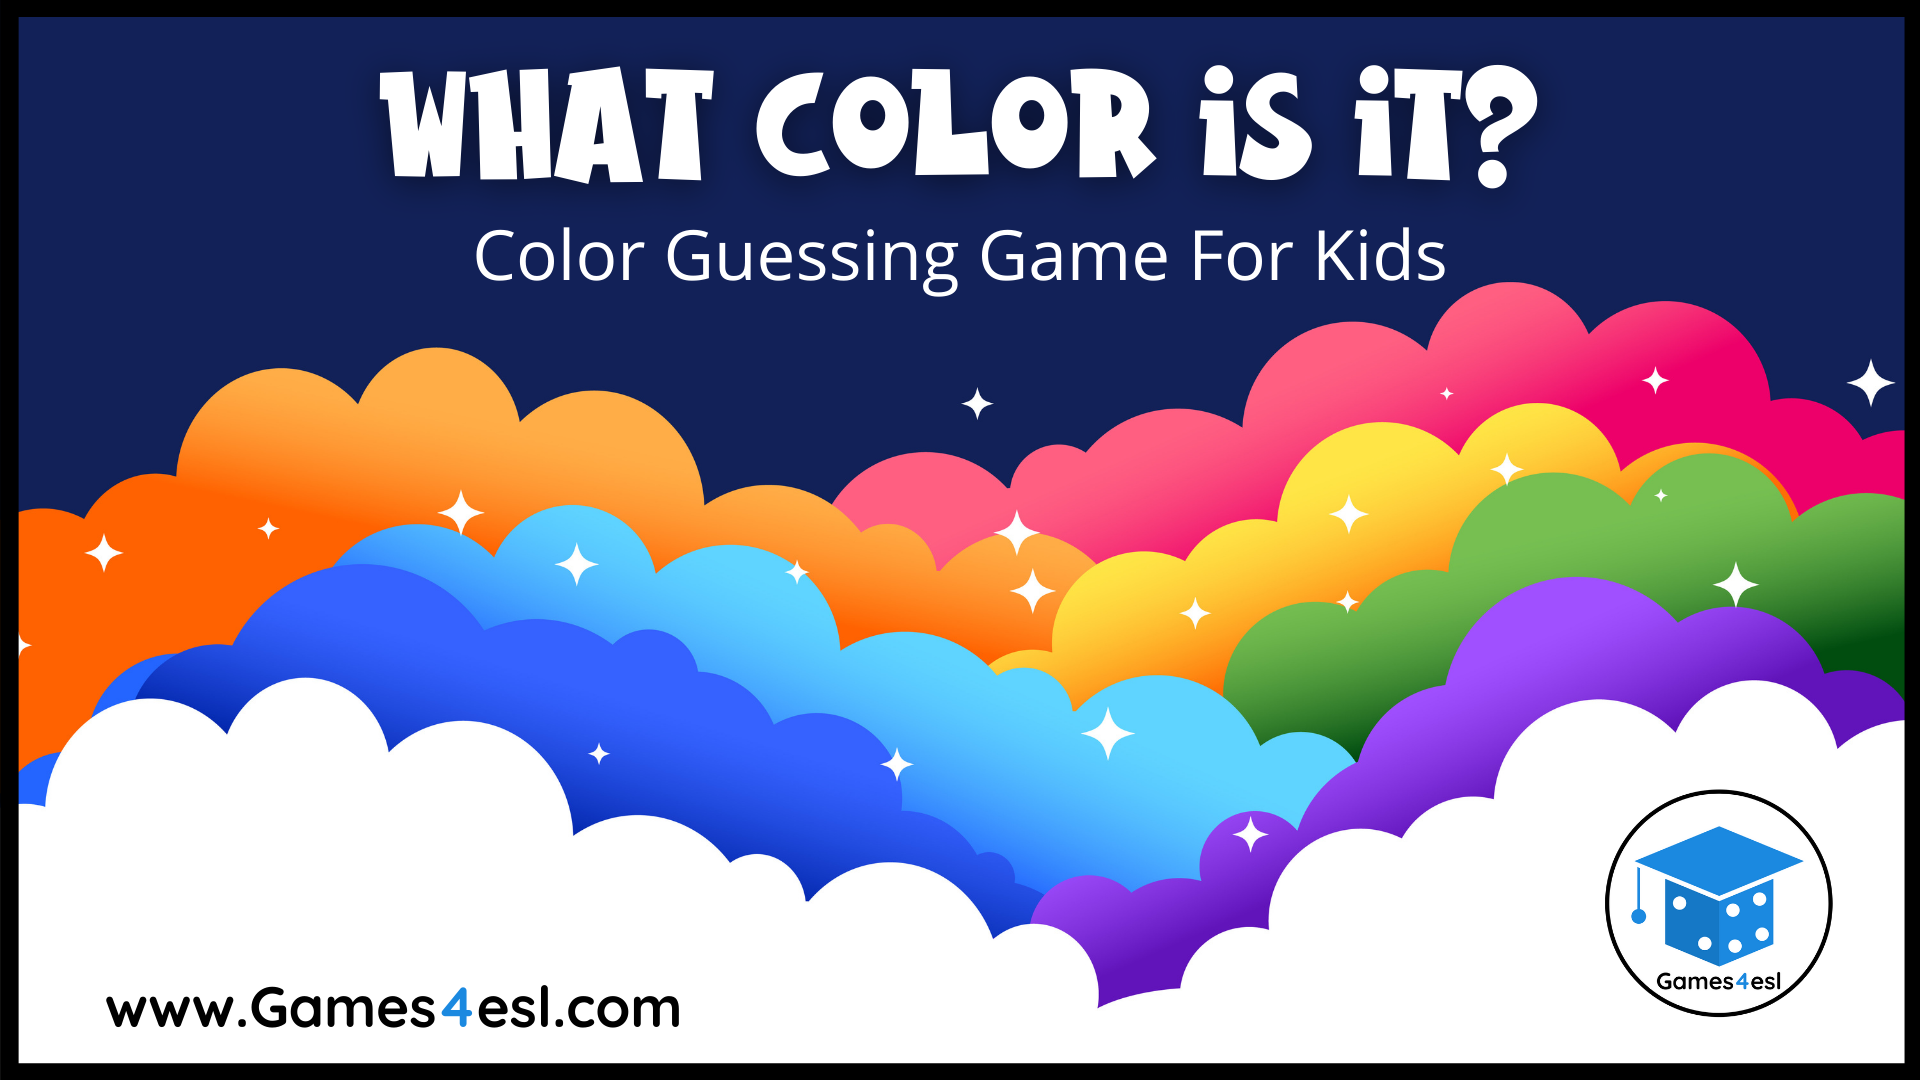 Online Listen and Color Game